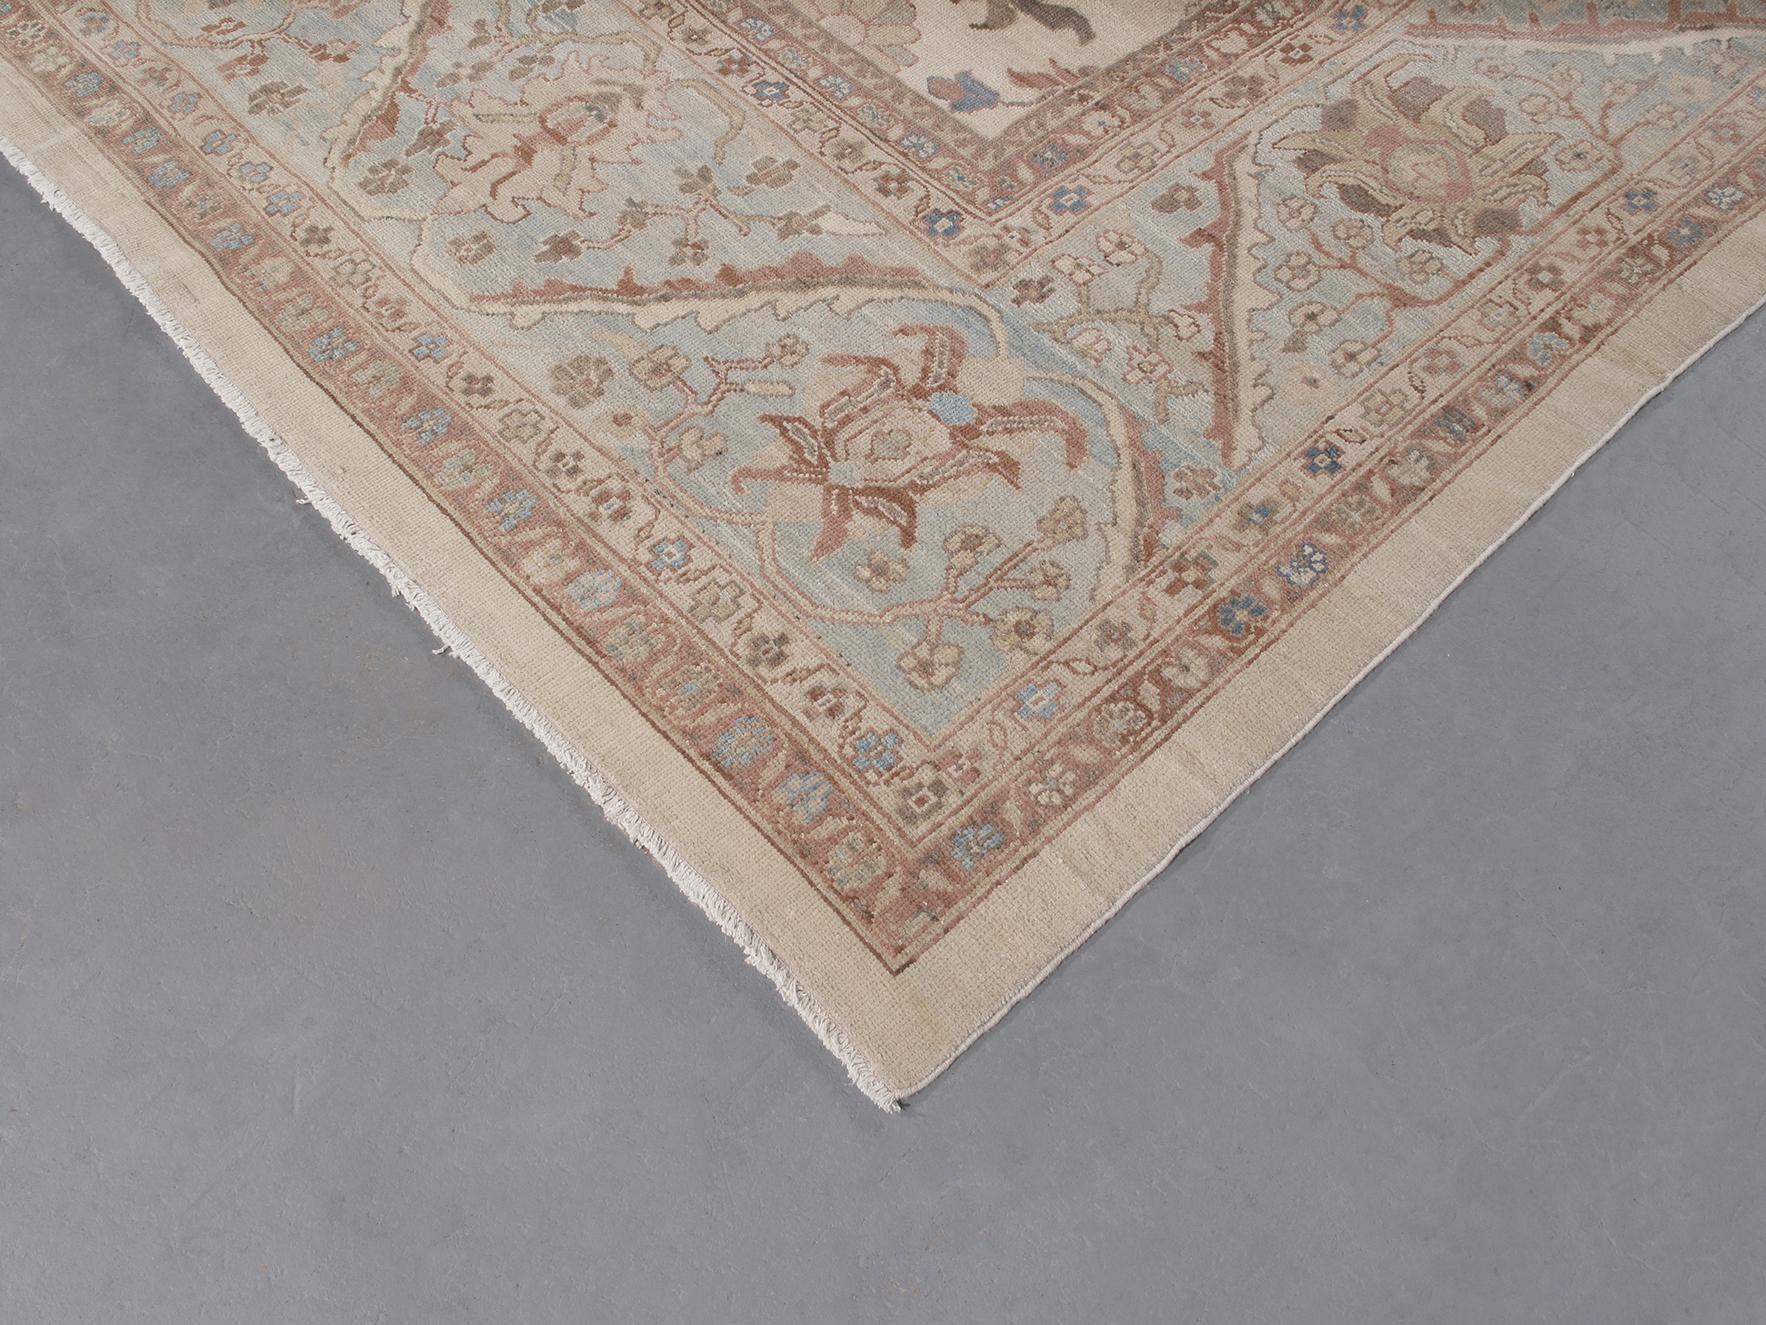 Hand-Knotted Original Persian Ziegler Sultanabad Rug in Pale Blue, Beige, and Rust Colors For Sale